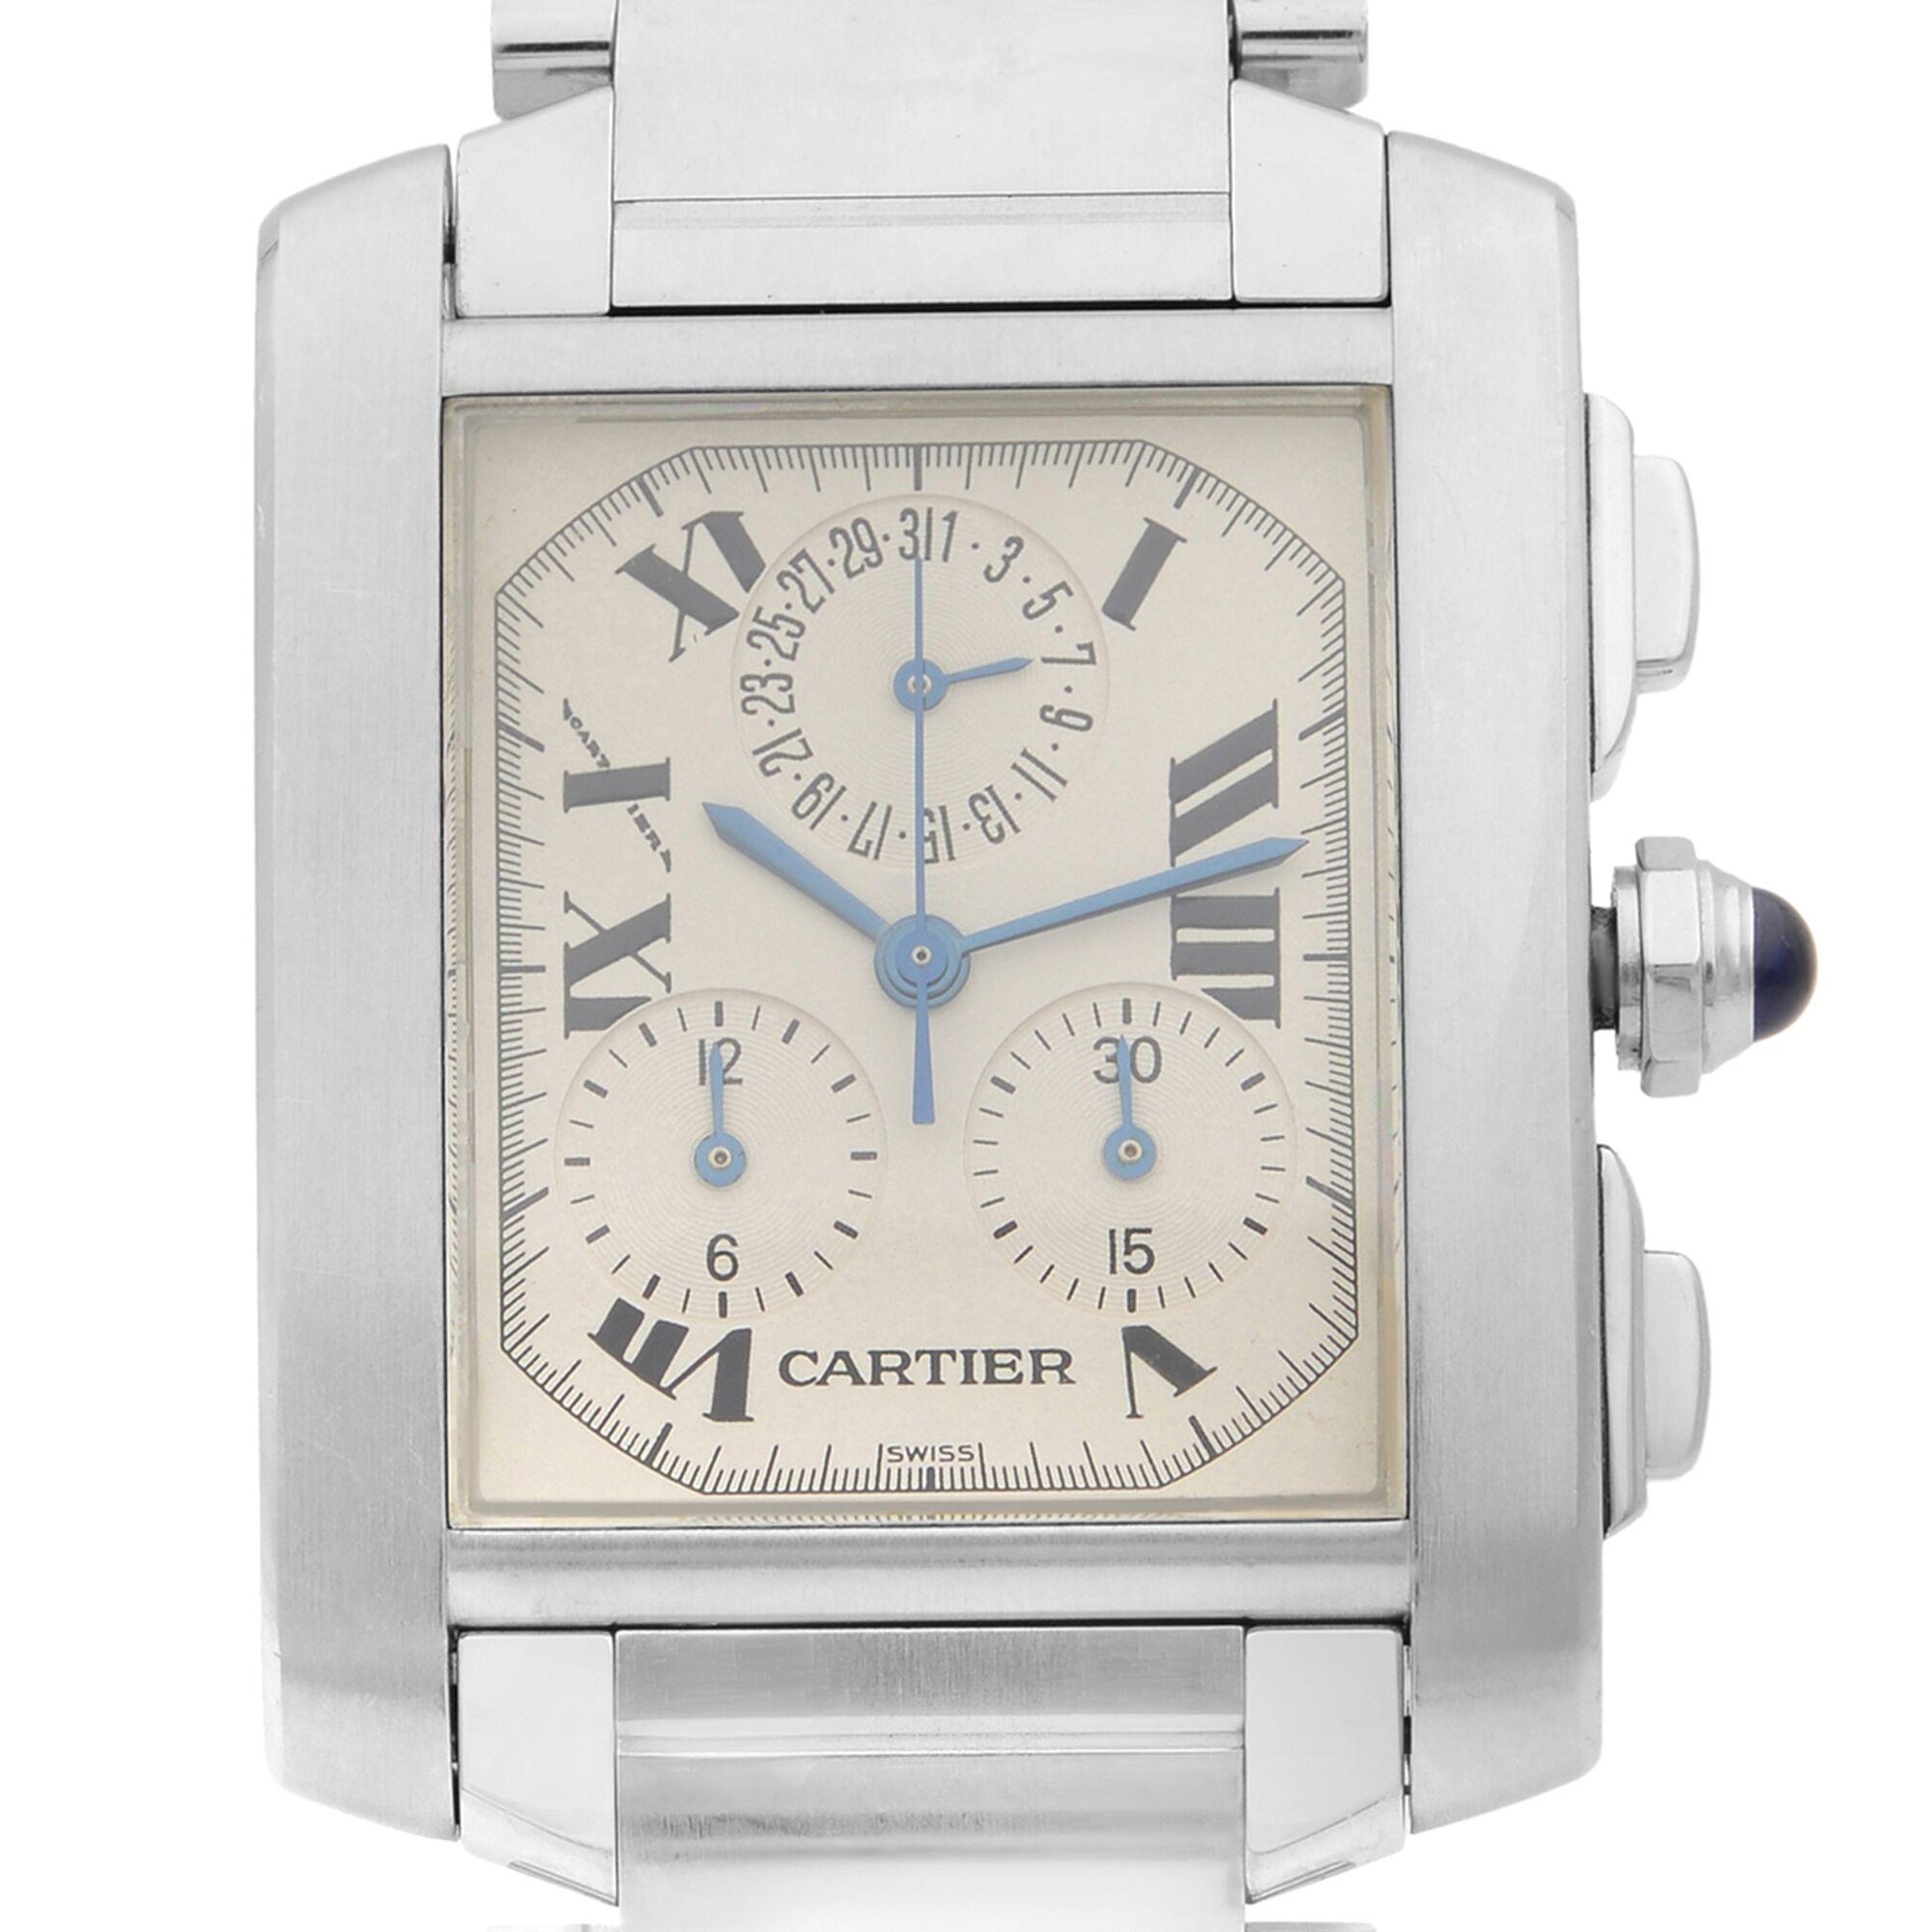 This pre-owned Cartier Tank  W51001Q3  is a beautiful men's timepiece that is powered by quartz (battery) movement which is cased in a stainless steel case. It has a  rectangle shape face, chronograph, date indicator, small seconds subdial dial, and